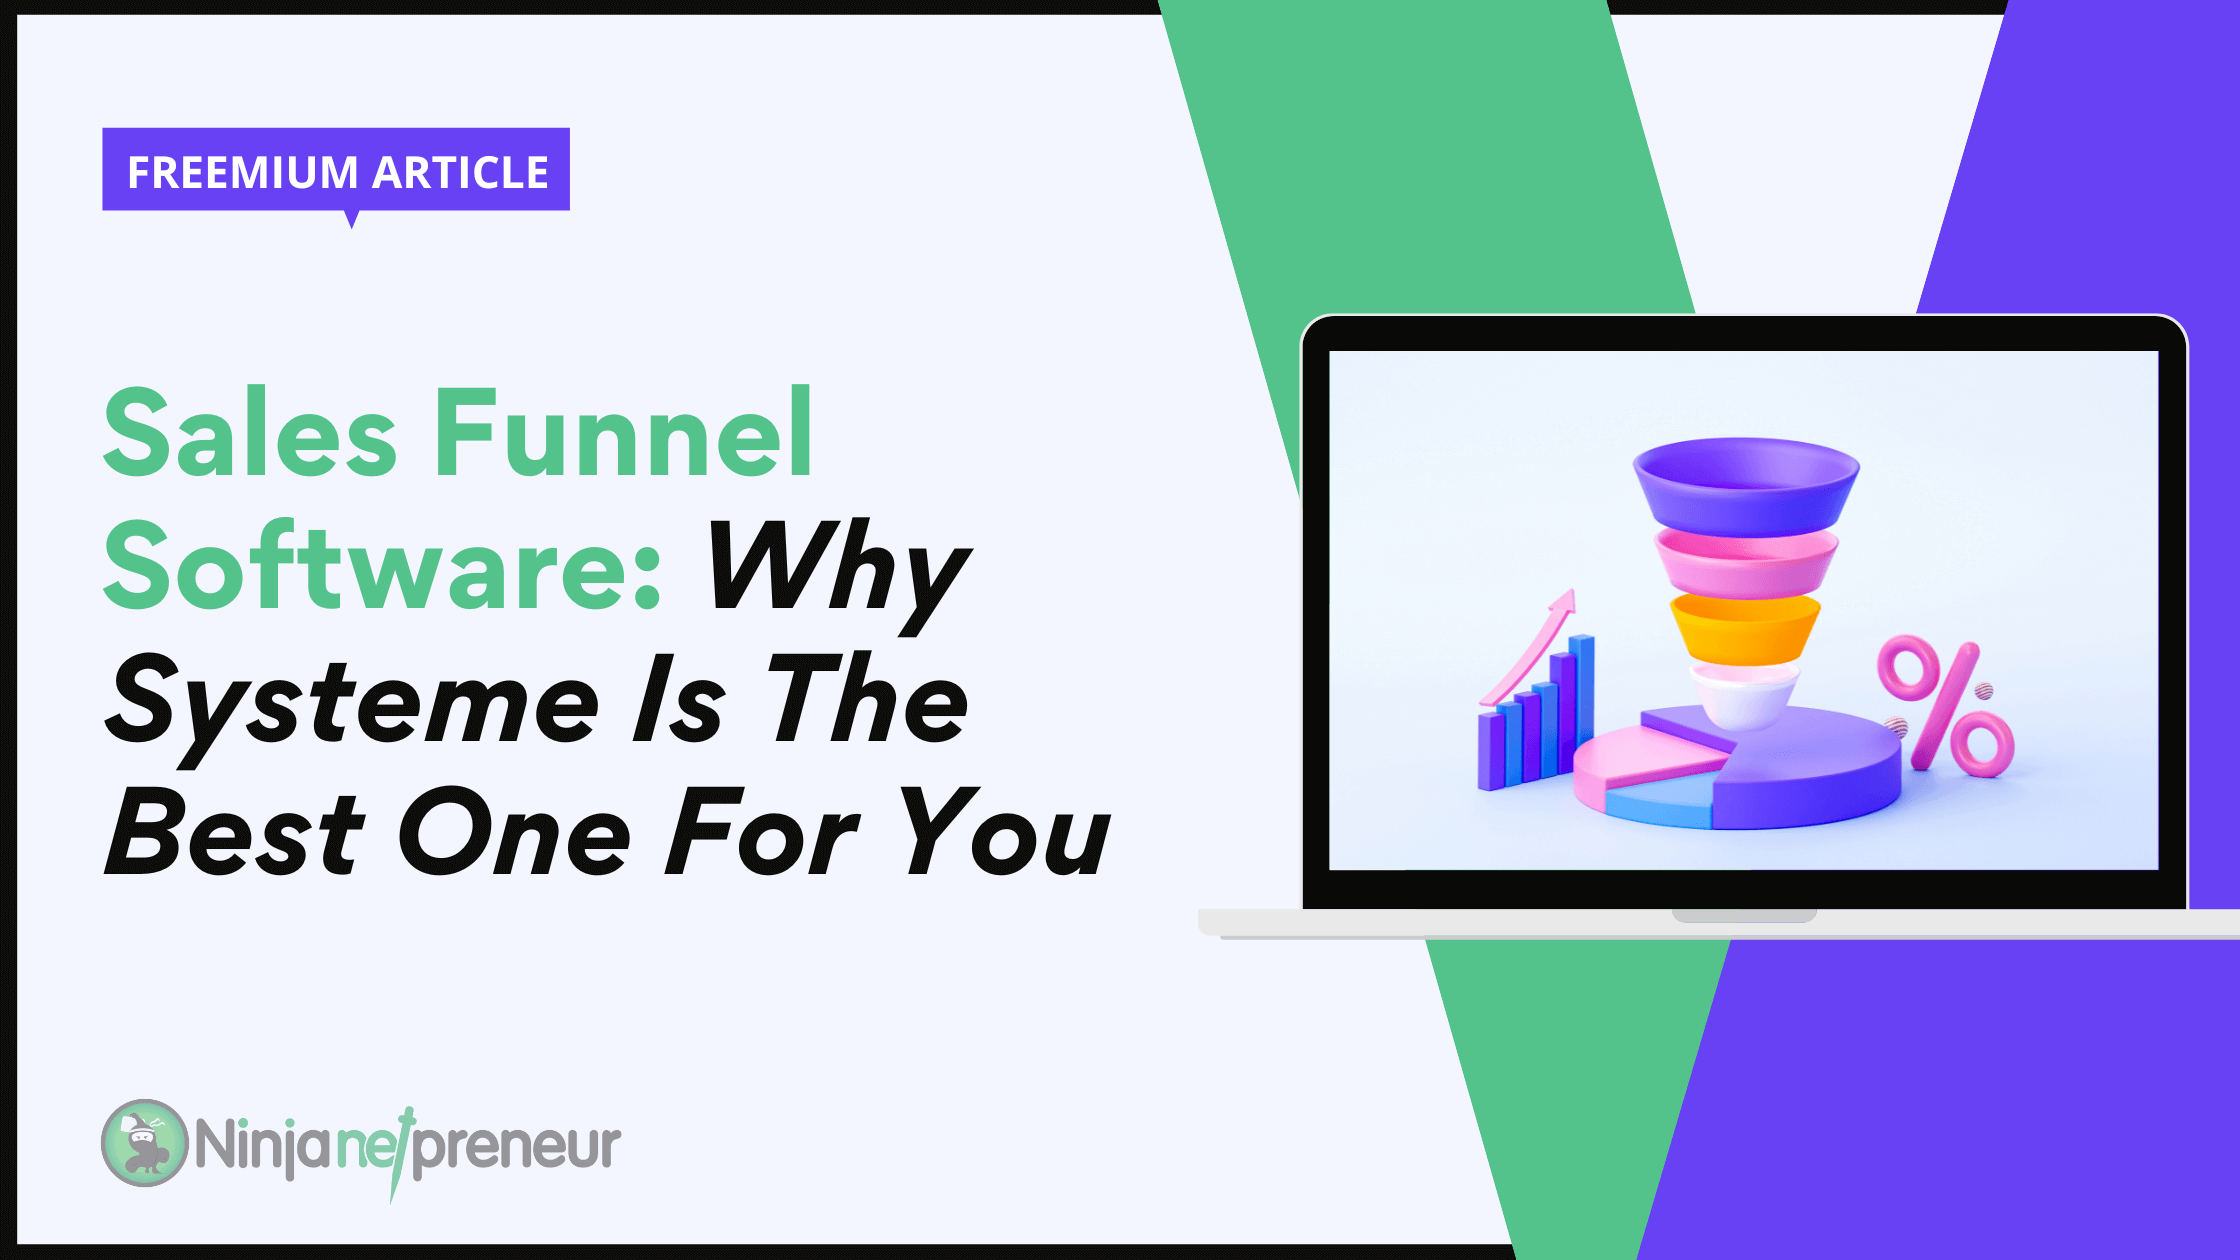 Sales Funnel Software: Why Systeme is the Best One for You